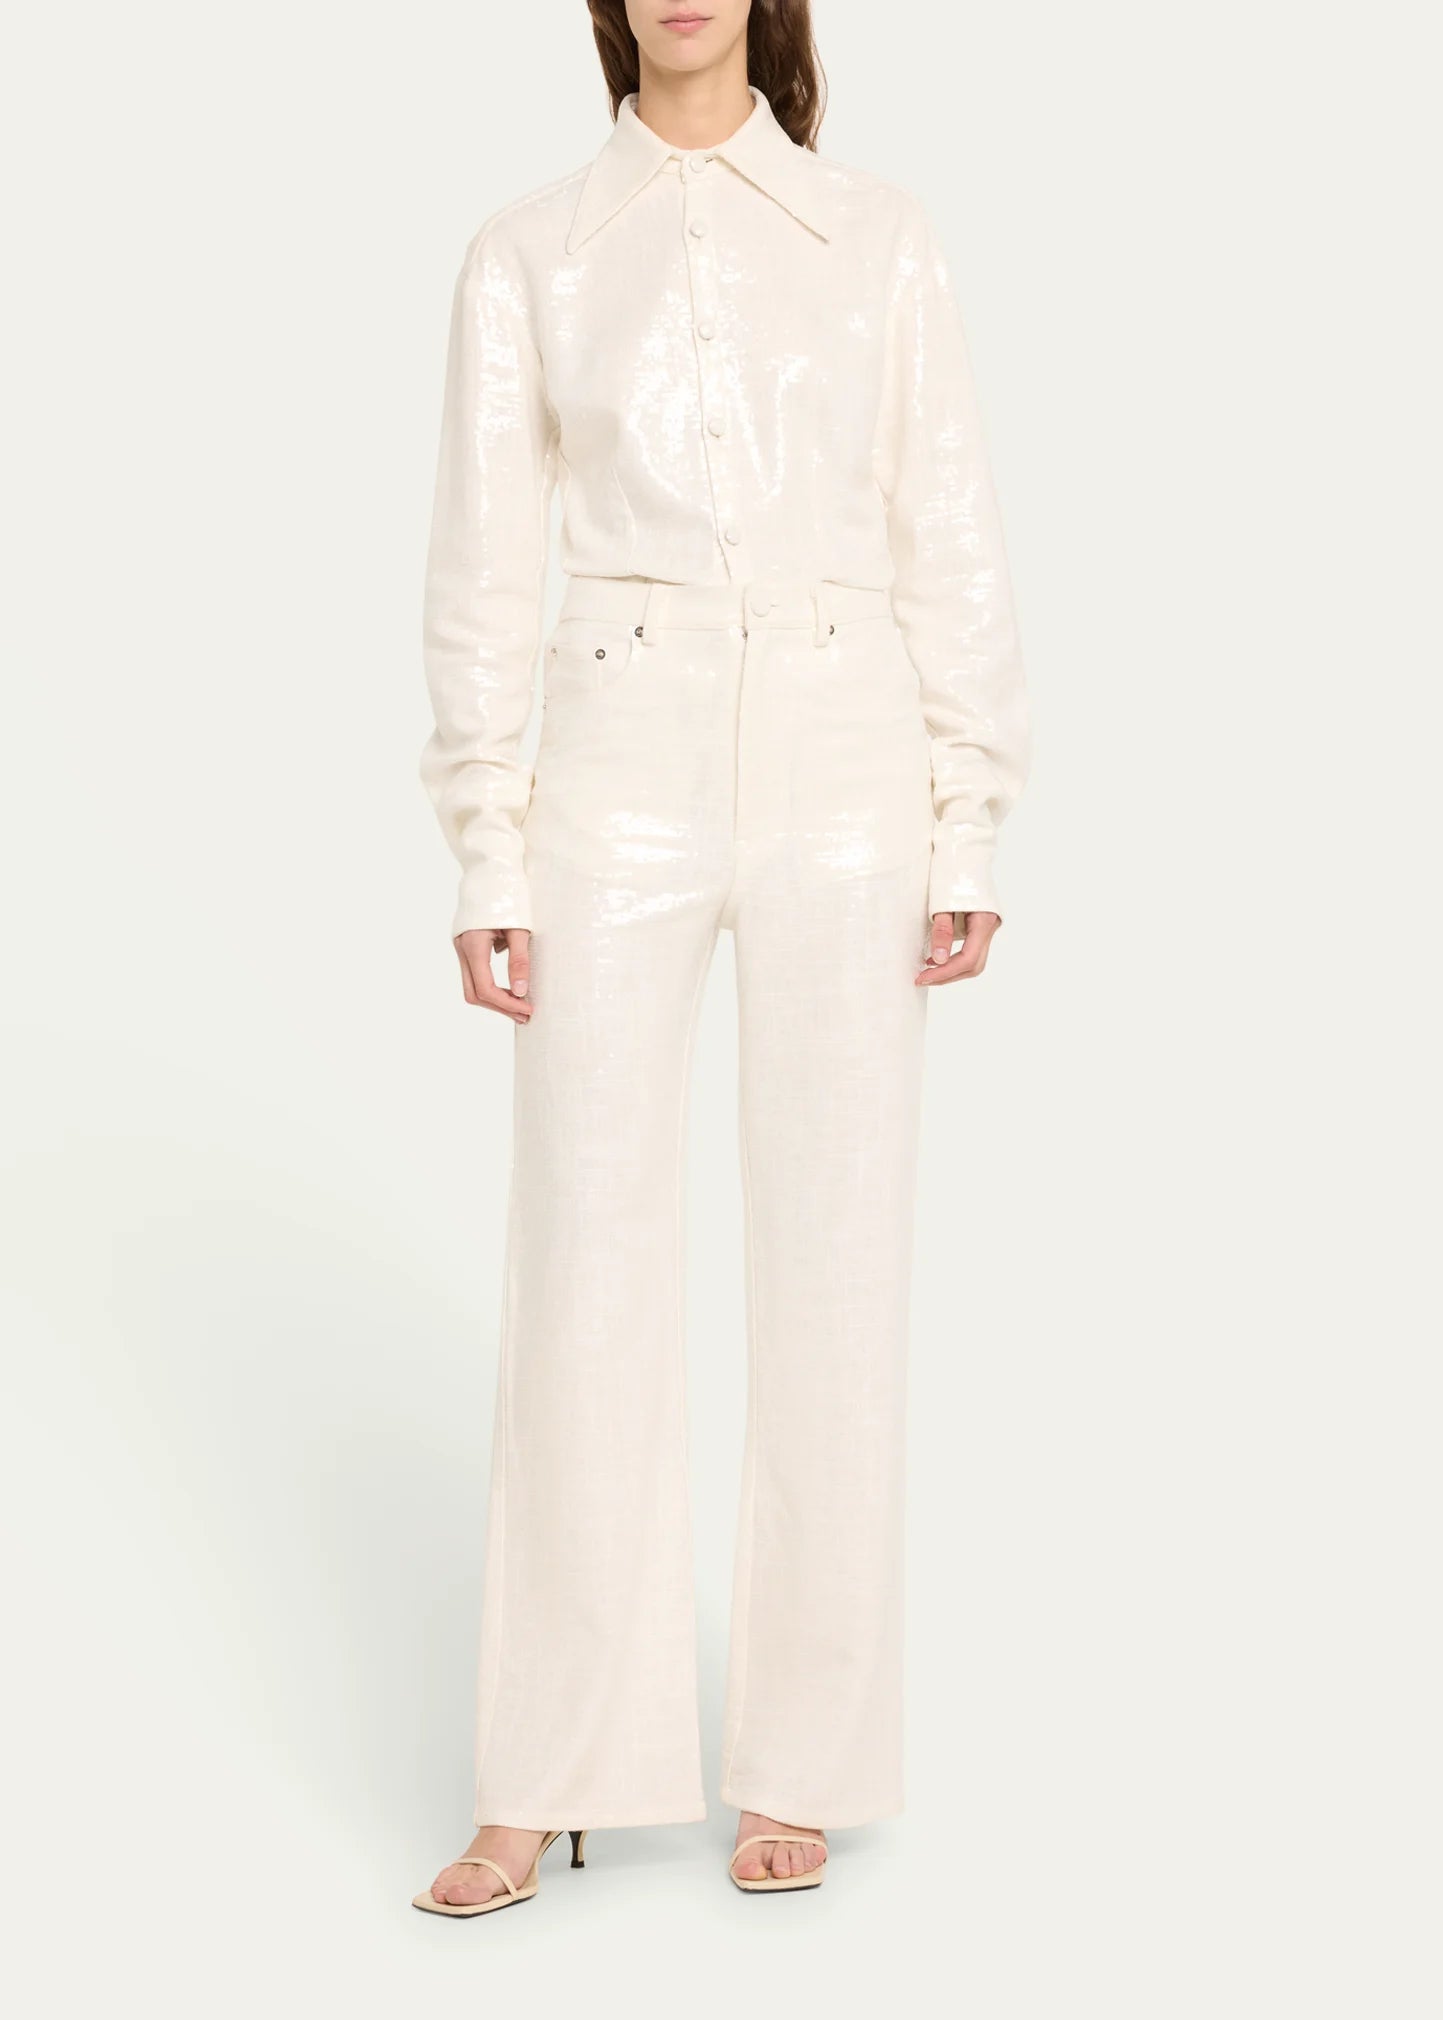 White Sequined Linen Pants